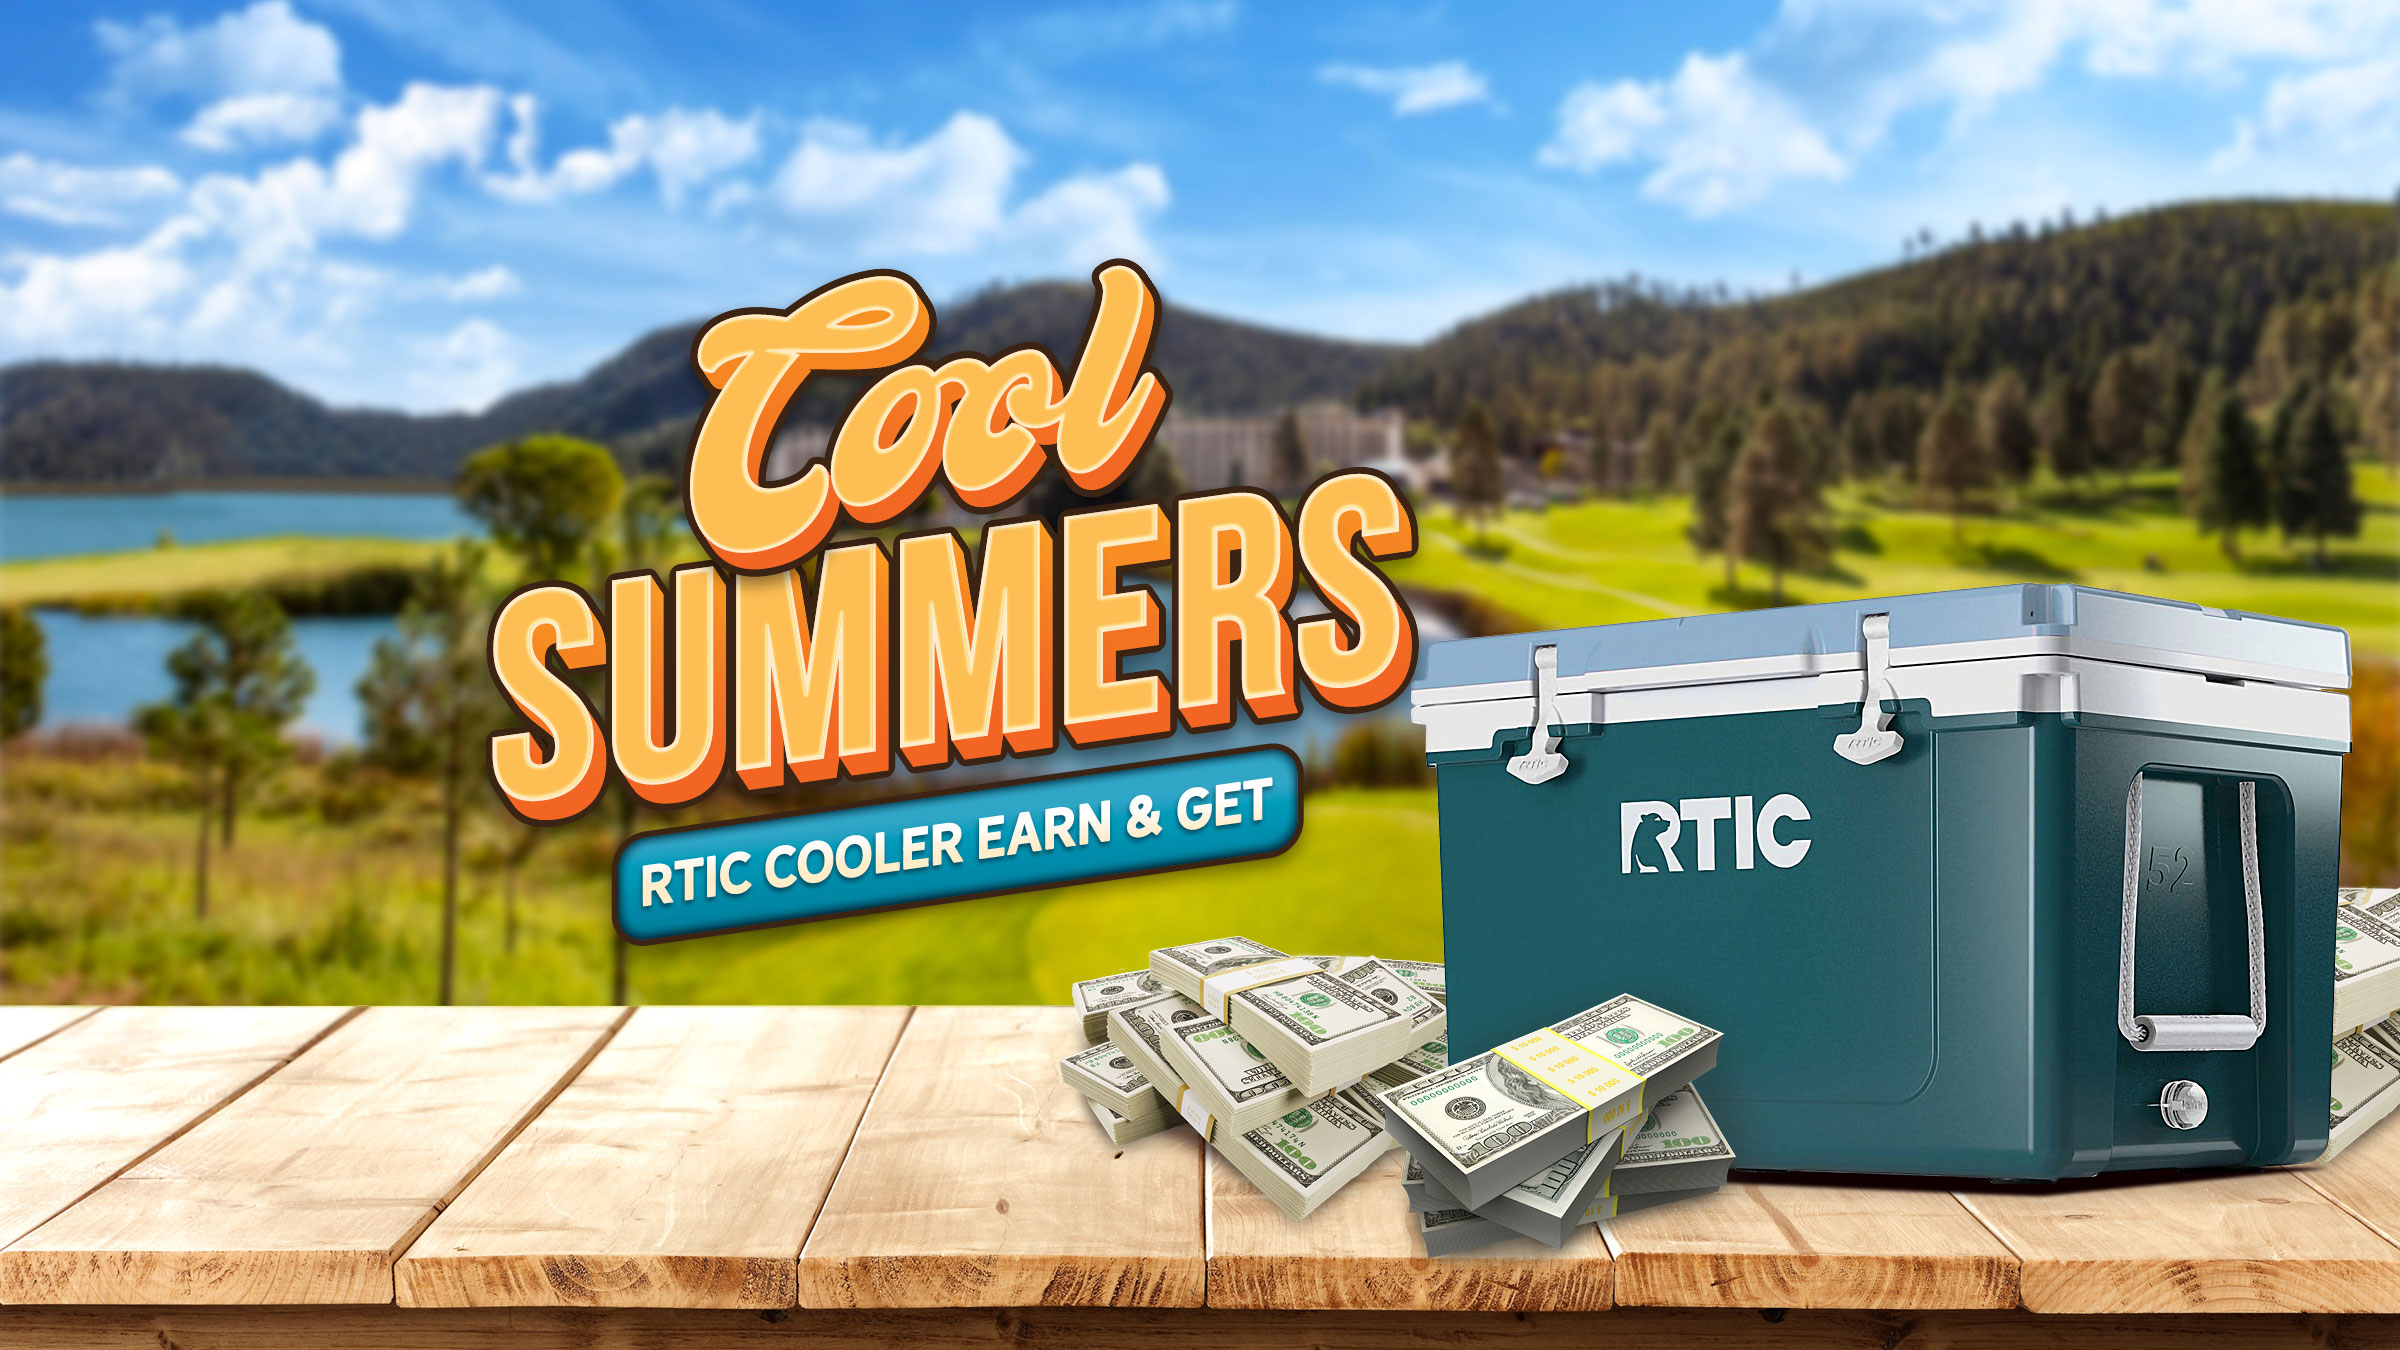 COOL SUMMERS RTIC COOLER Earn & Get